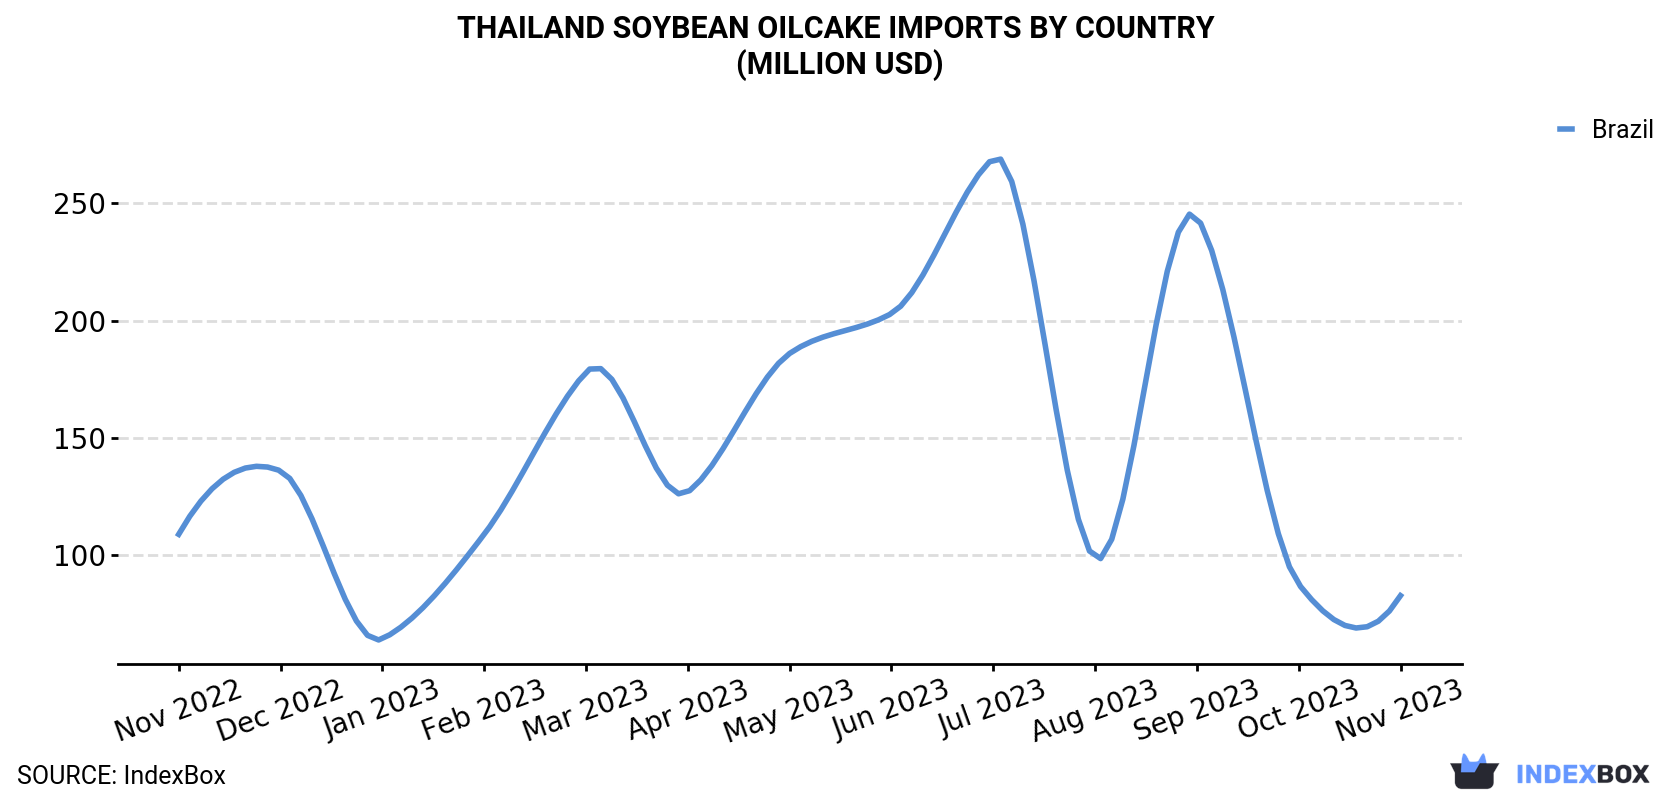 Thailand Soybean Oilcake Imports By Country (Million USD)